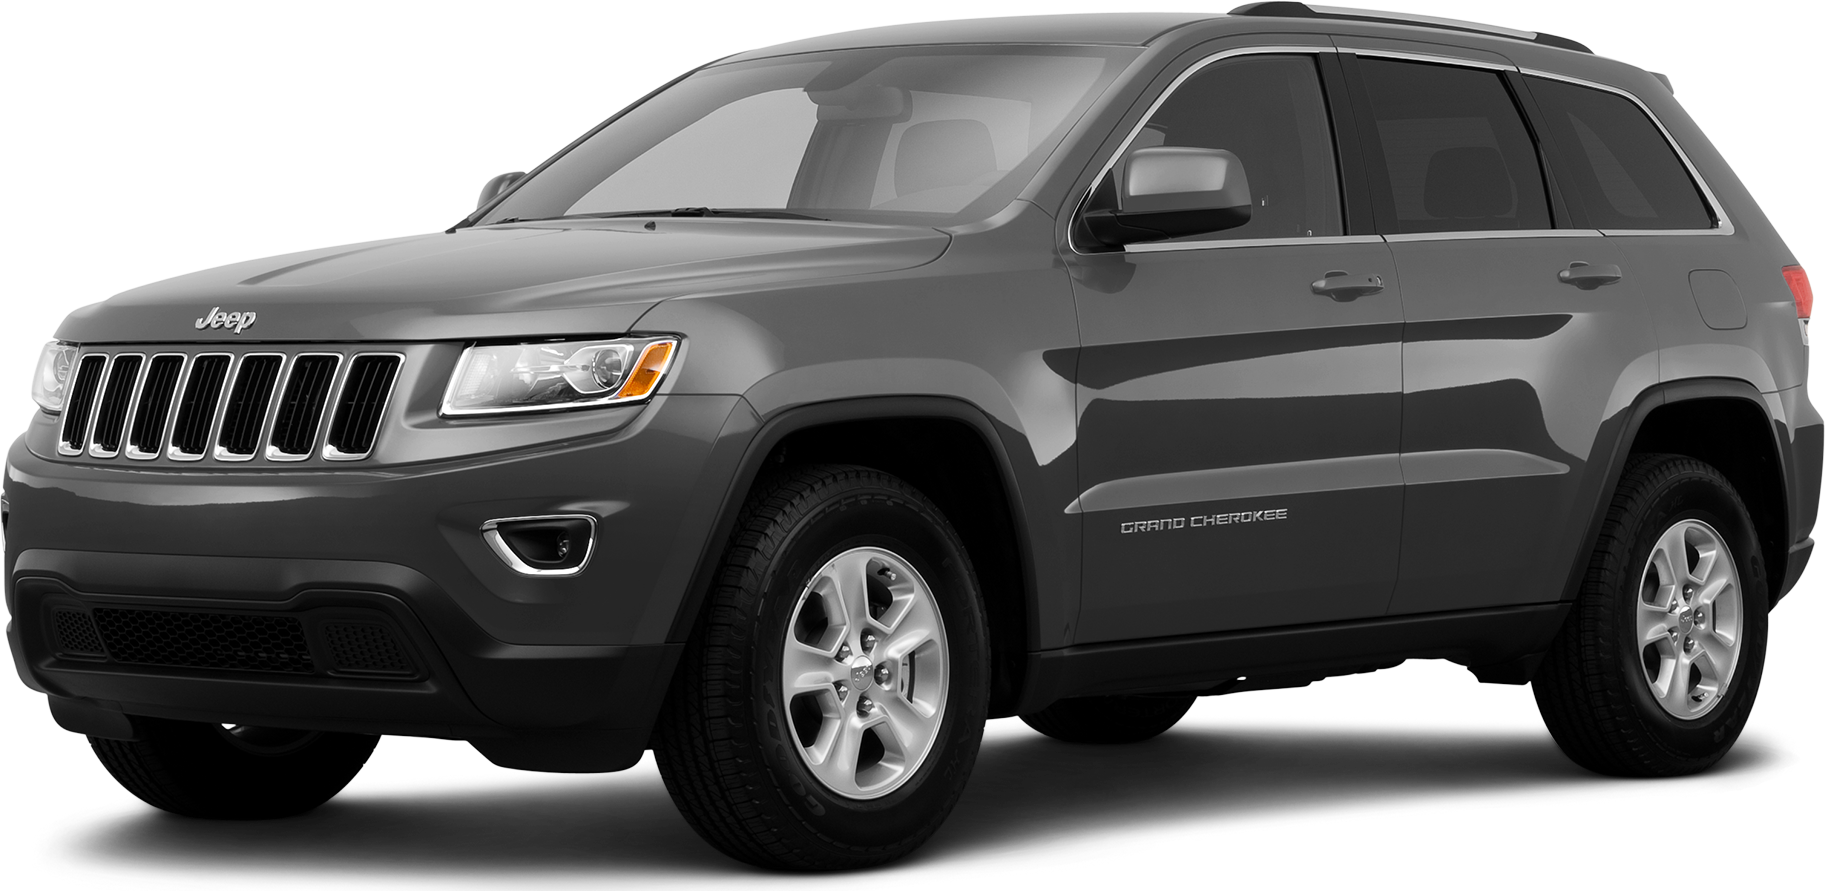 2014 Jeep Grand Cherokee Price Value Ratings And Reviews Kelley Blue Book 